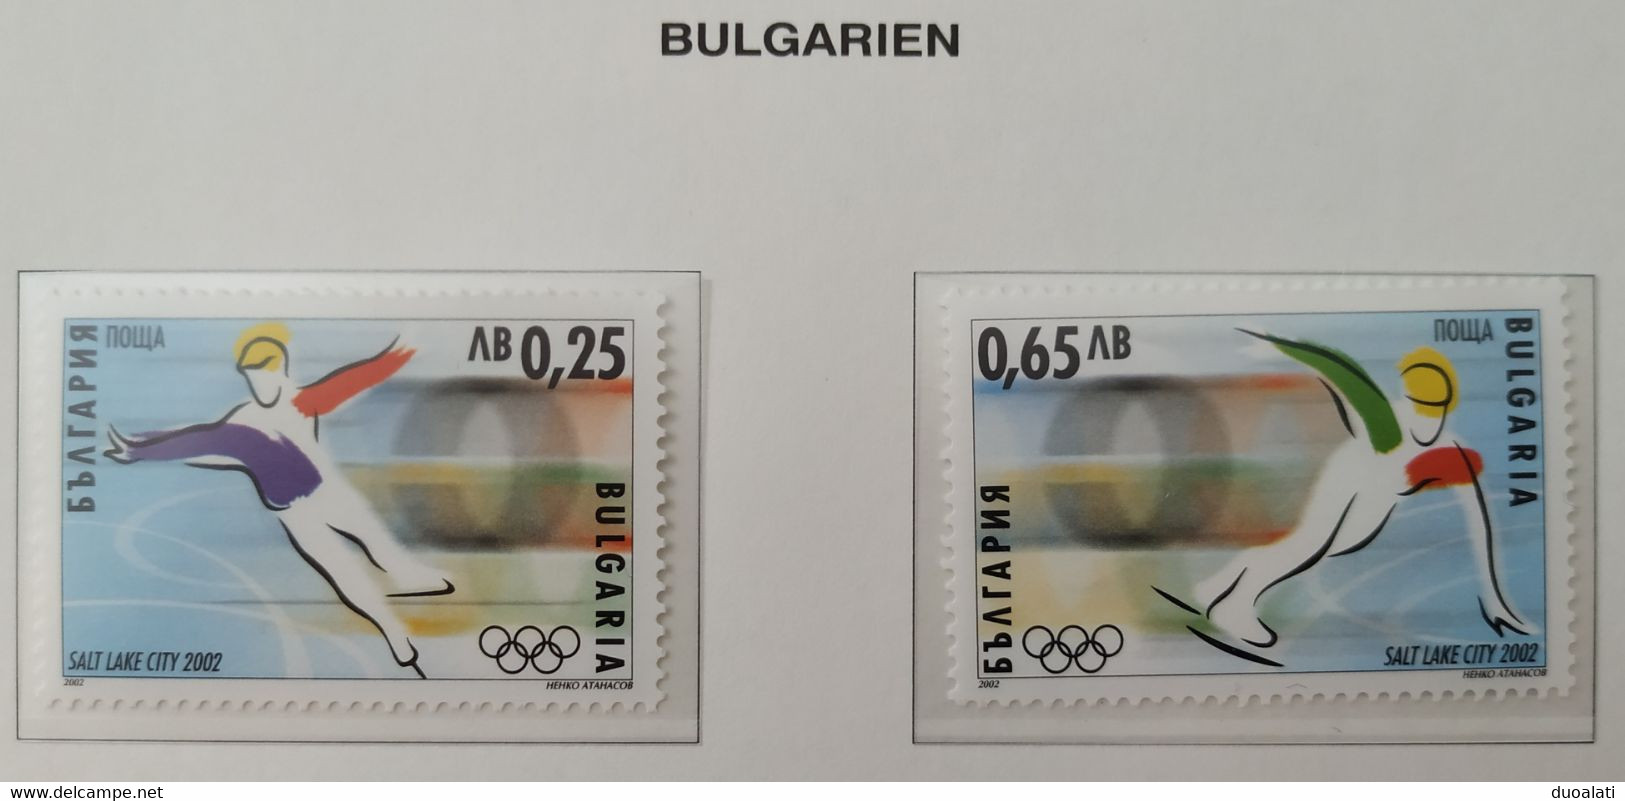 Bulgaria 2002 Olympic Winter Games Salt Lake City Skiing Speed Skating 2 Stationeries Stamps & Cover MNH - Hiver 2002: Salt Lake City